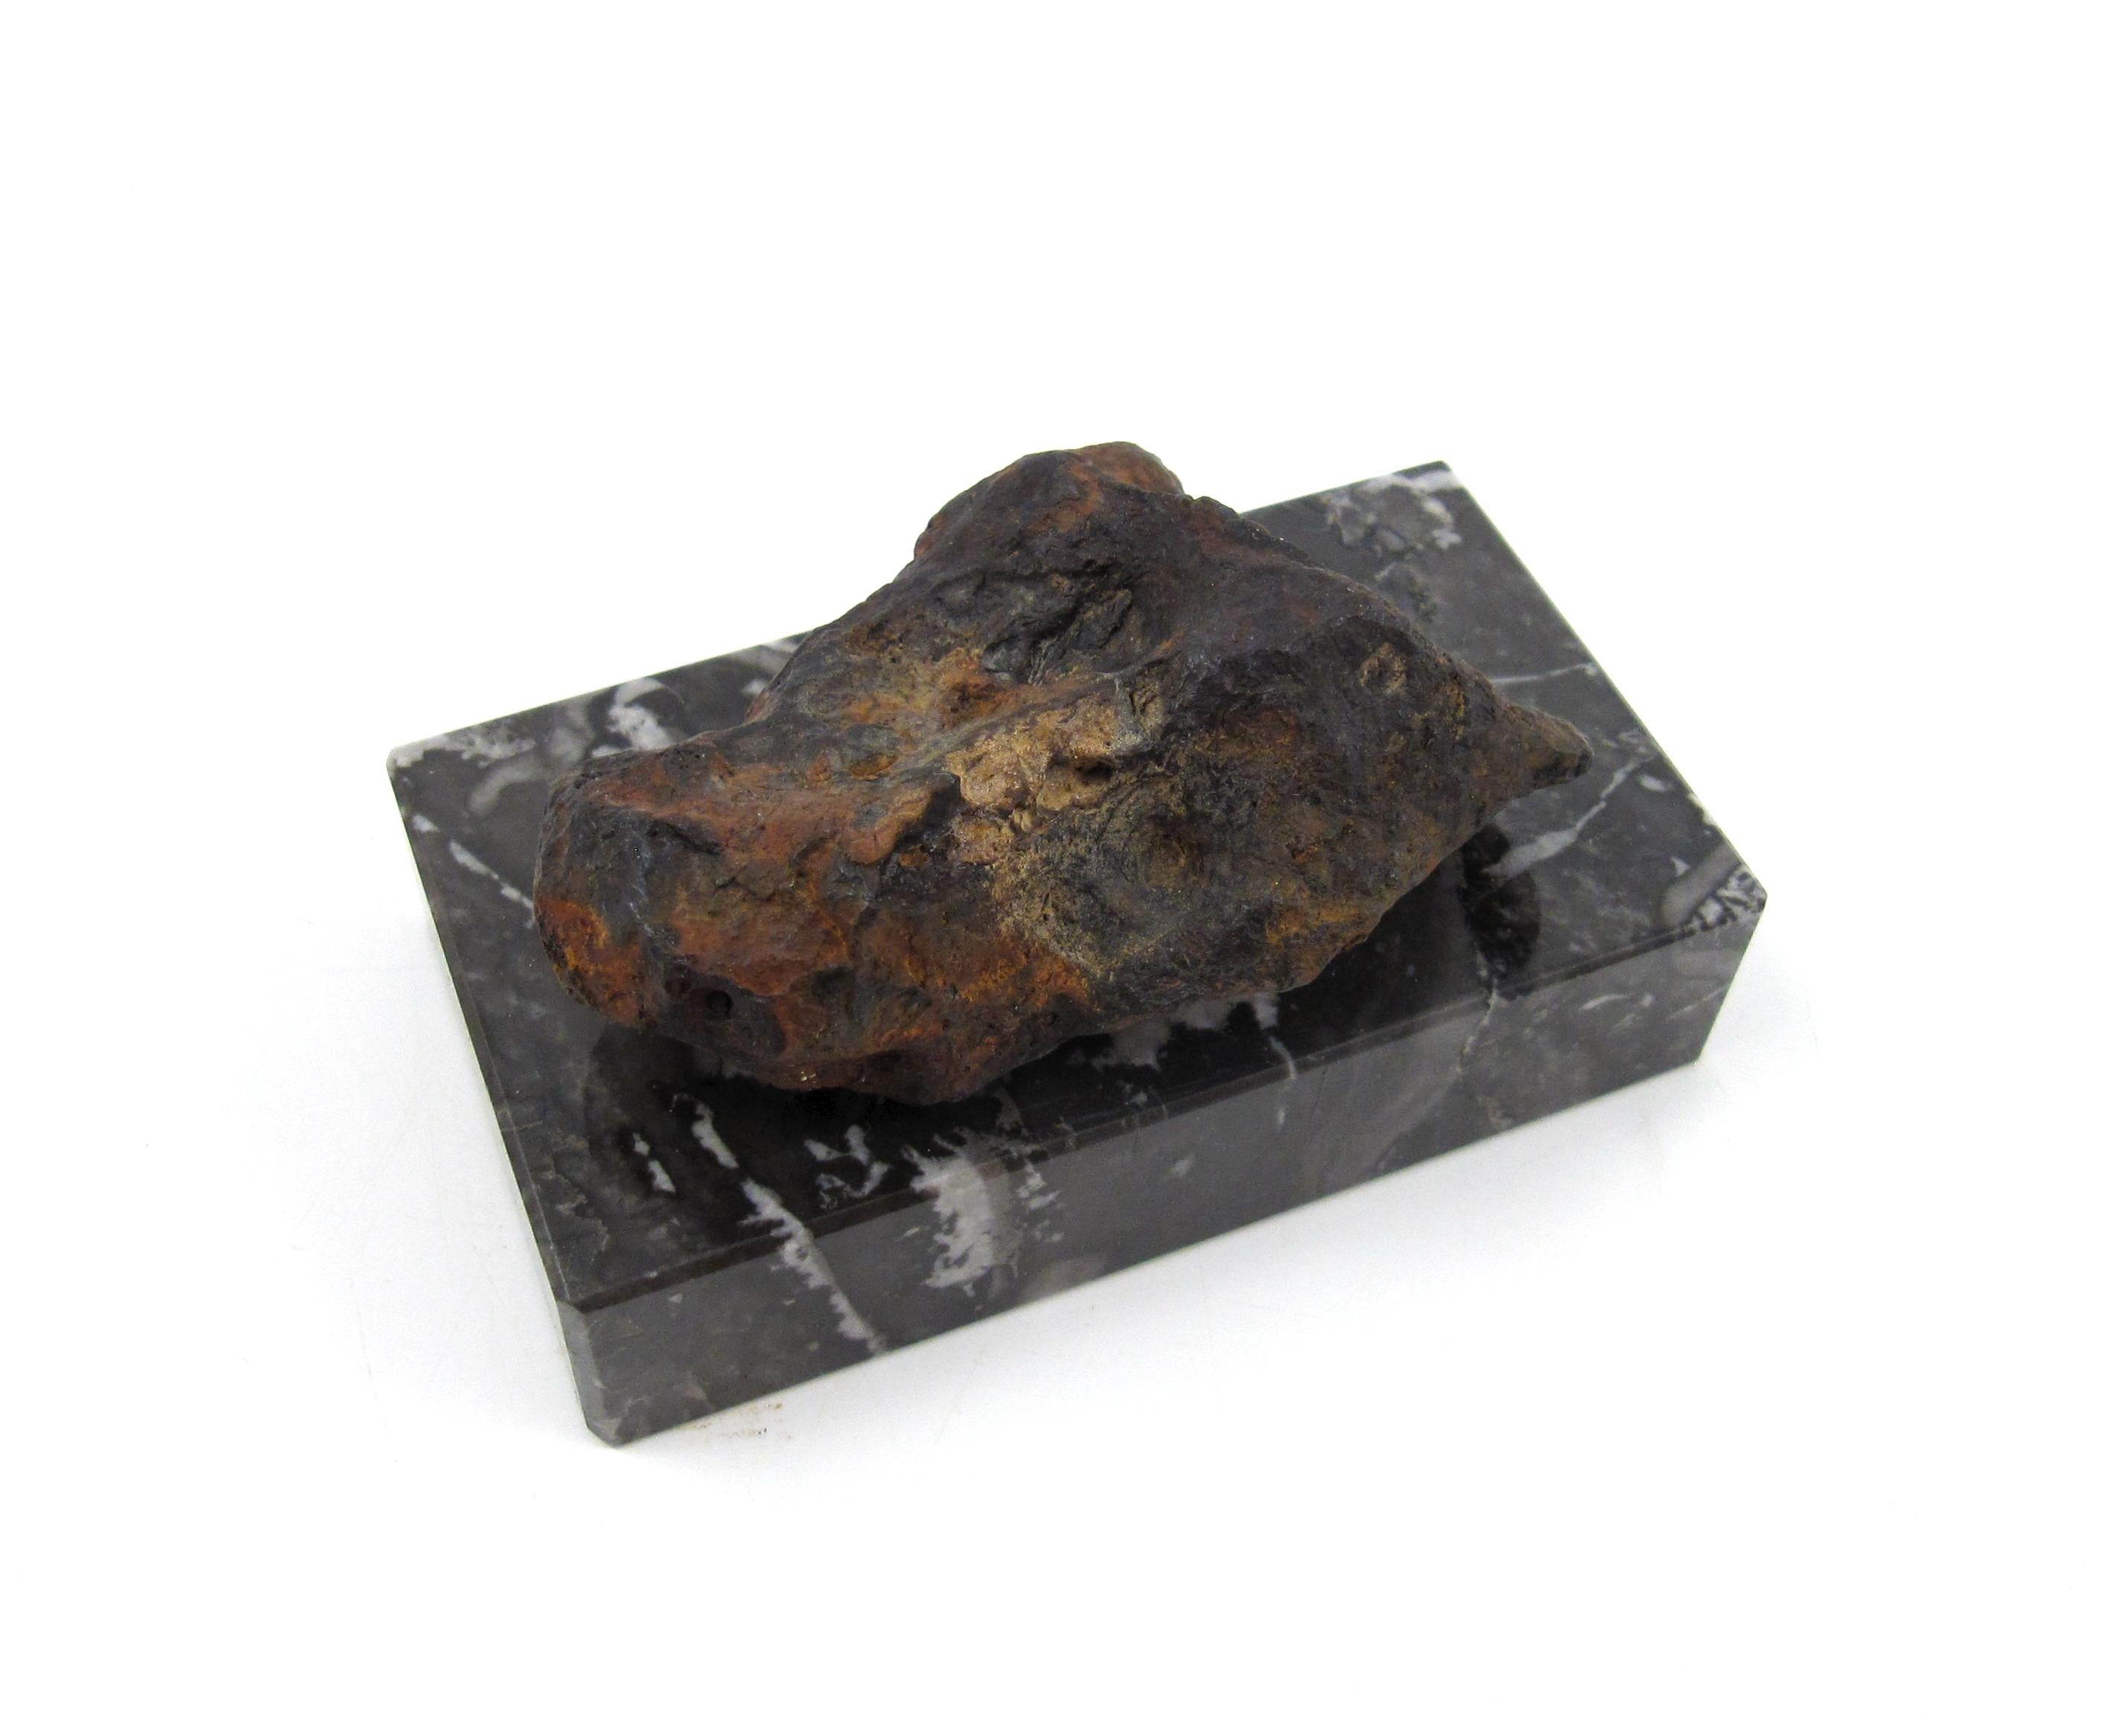 A Natural Iron Sculpture Shaped by Nature

The sculptured Meteorite is presented on a polished, black and white flamed marble block and held in place by a strong magnet. The specimen can be removed or positioned according to the liking of the